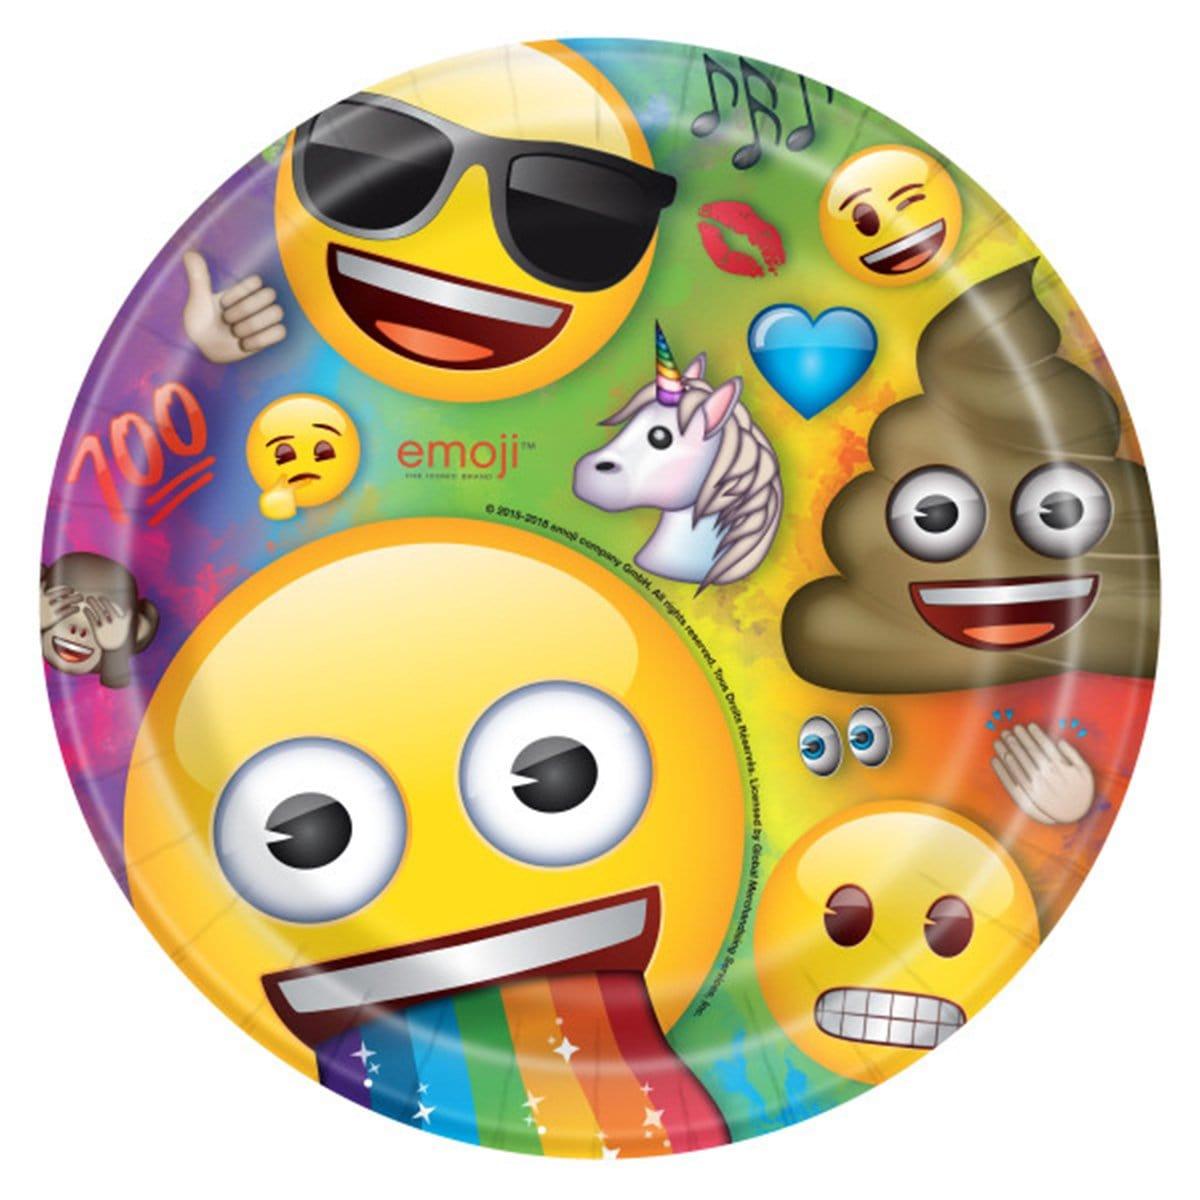 Buy Kids Birthday Emoji Dinner Plates 9 inches, 8 per package sold at Party Expert